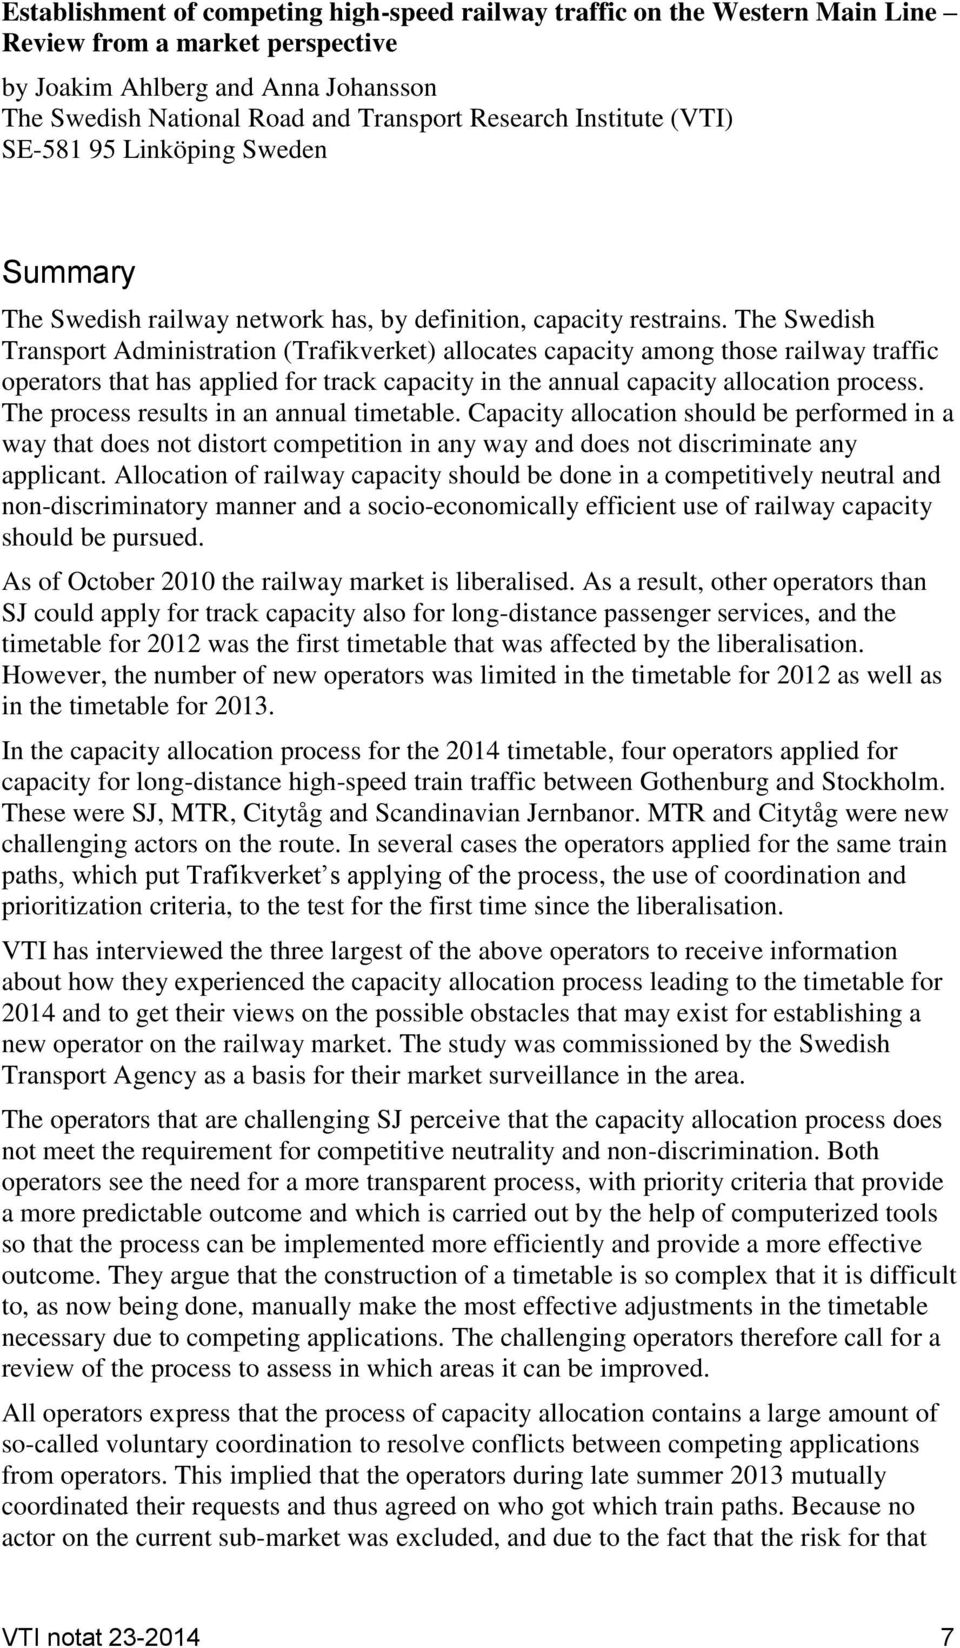 The Swedish Transport Administration (Trafikverket) allocates capacity among those railway traffic operators that has applied for track capacity in the annual capacity allocation process.